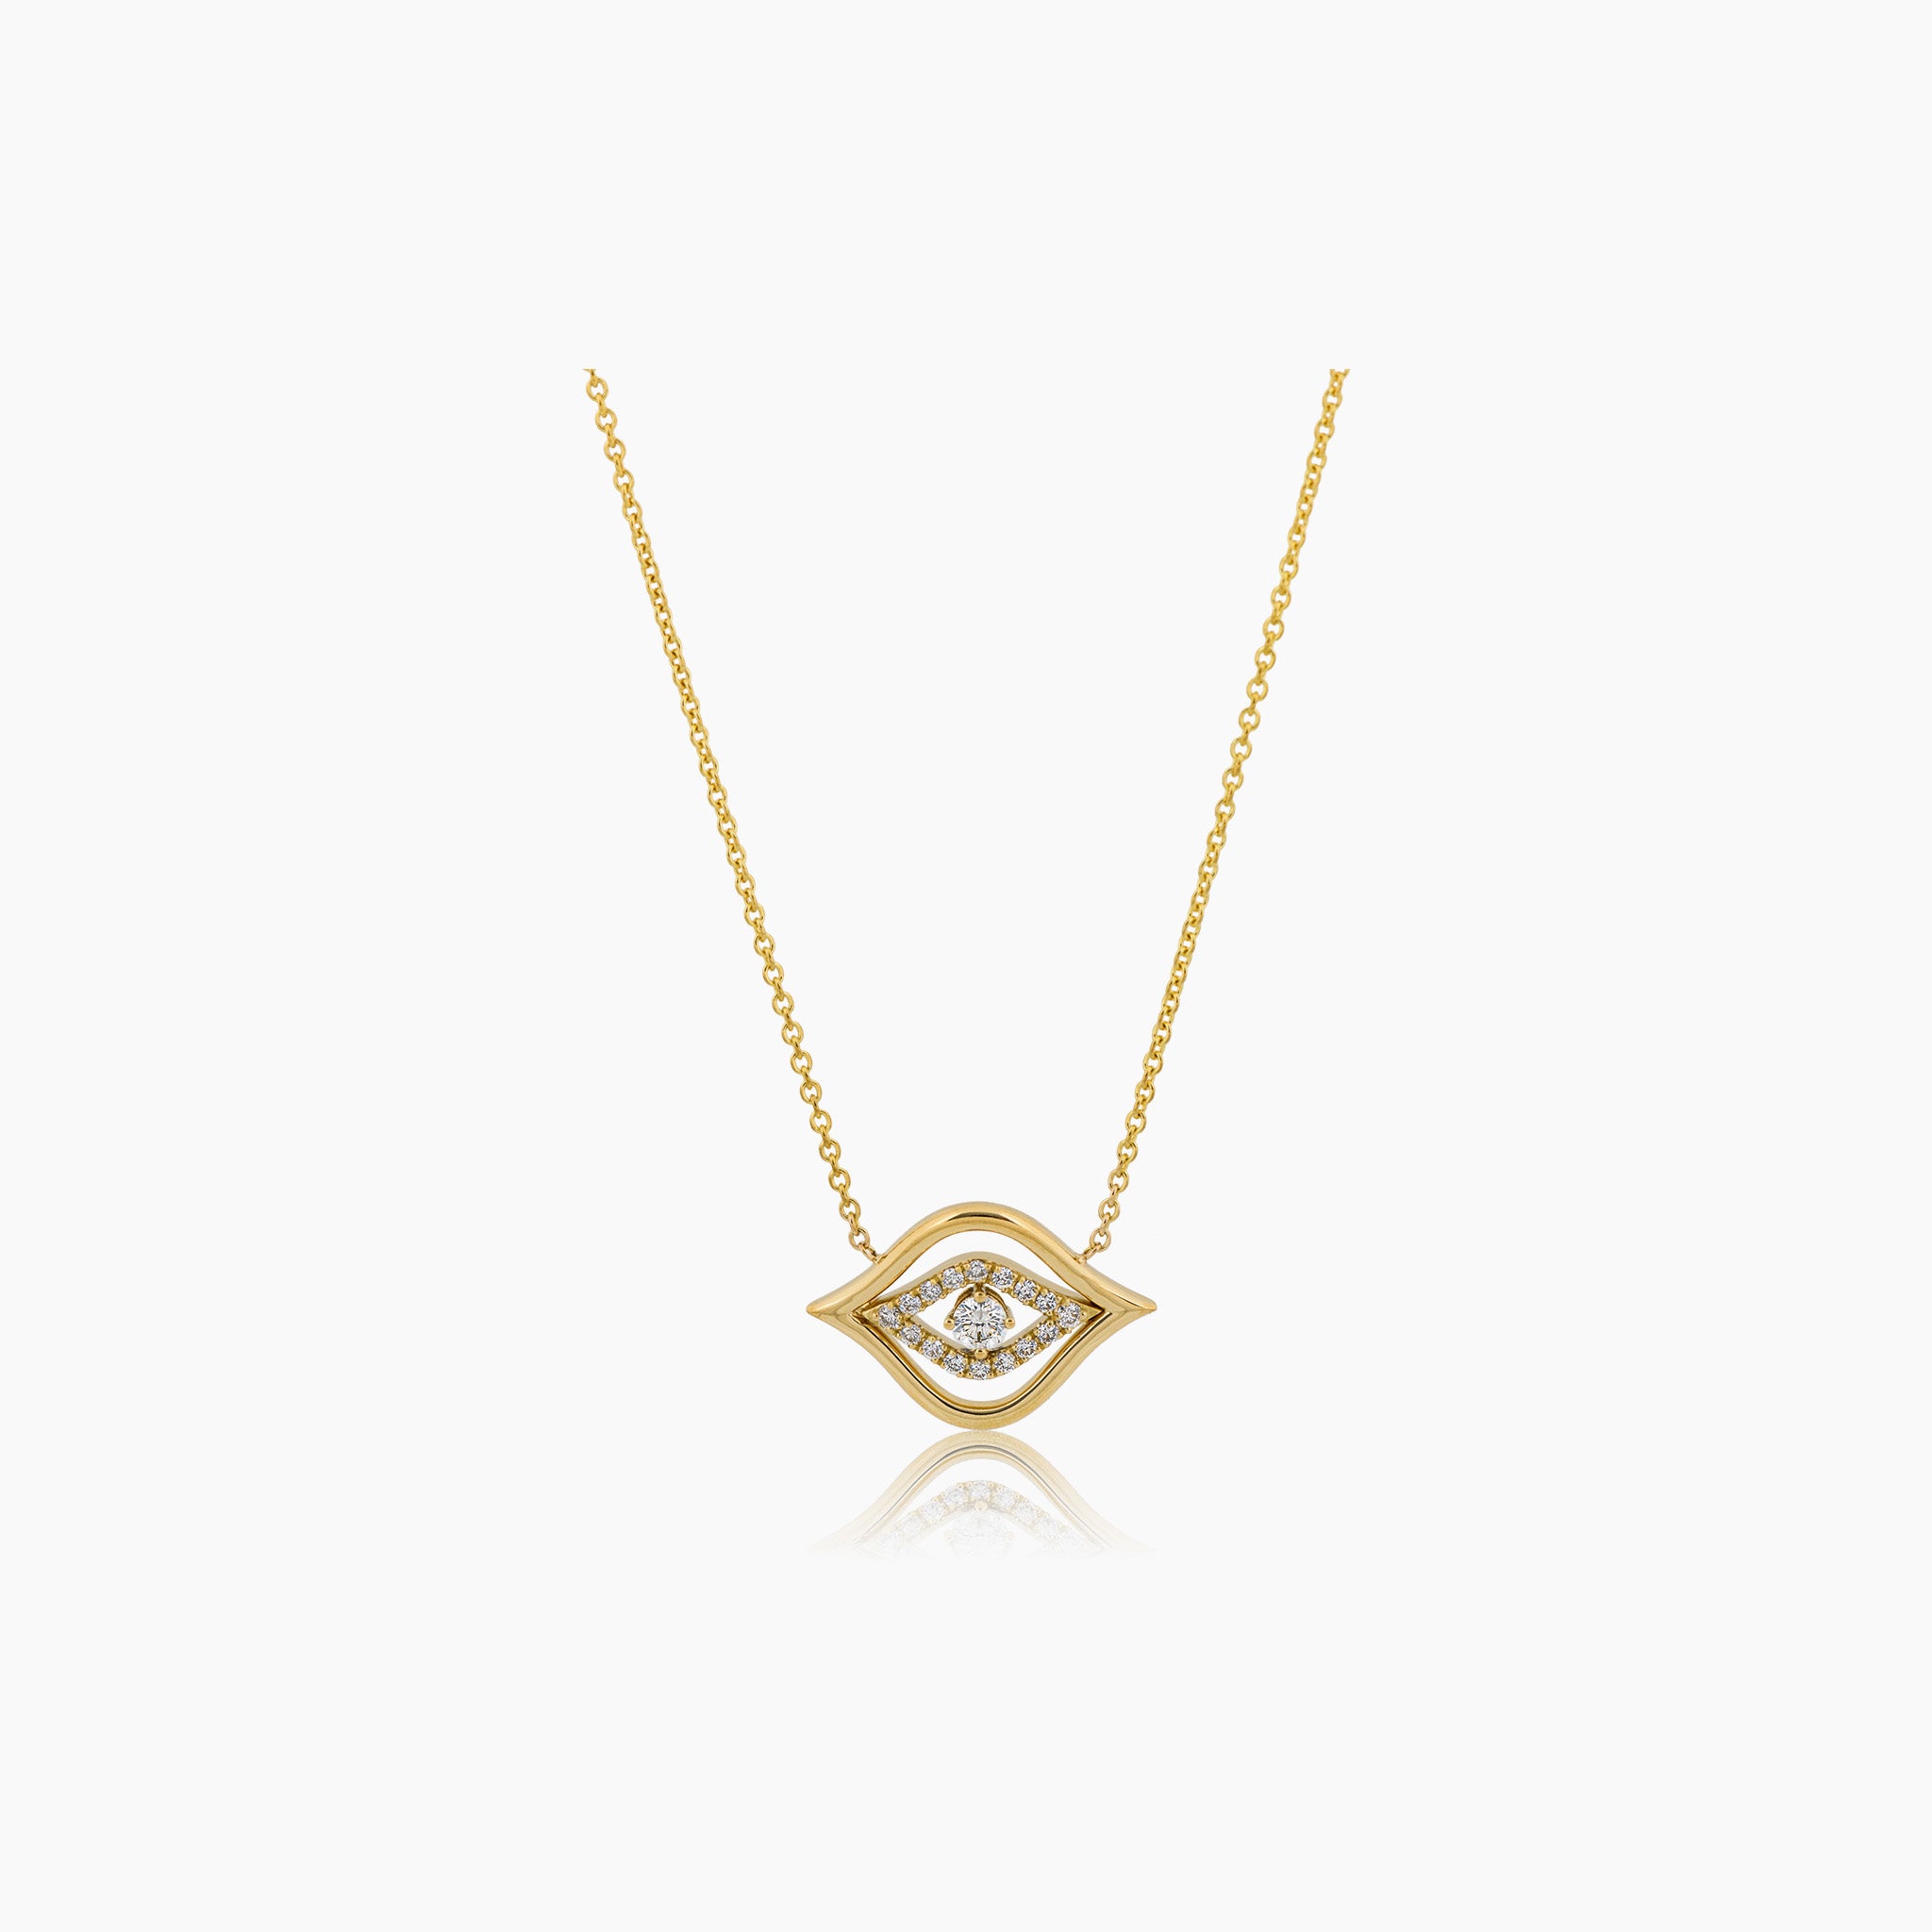 A captivating pendant featuring the protective Evil Eye design adorned with sparkling diamonds, showcased against an off-white background.